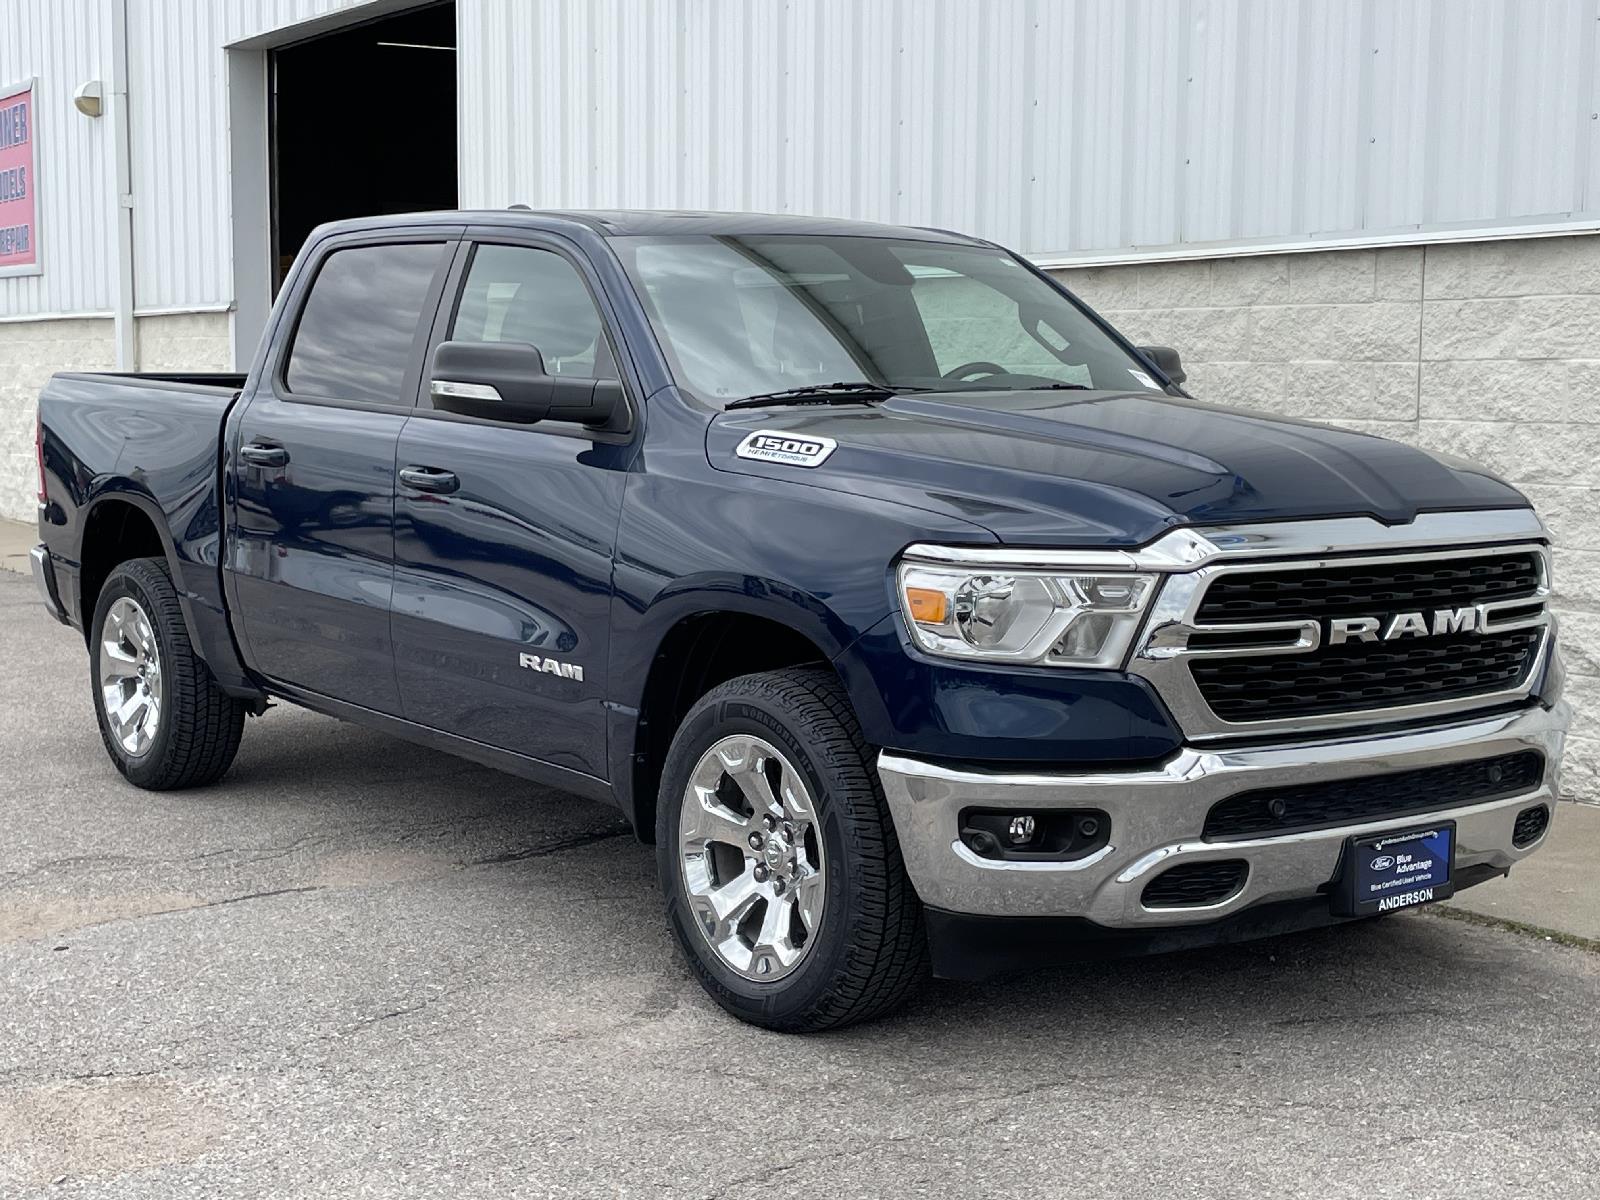 Used 2022 Ram 1500 Big Horn Crew Cab Truck for sale in Lincoln NE